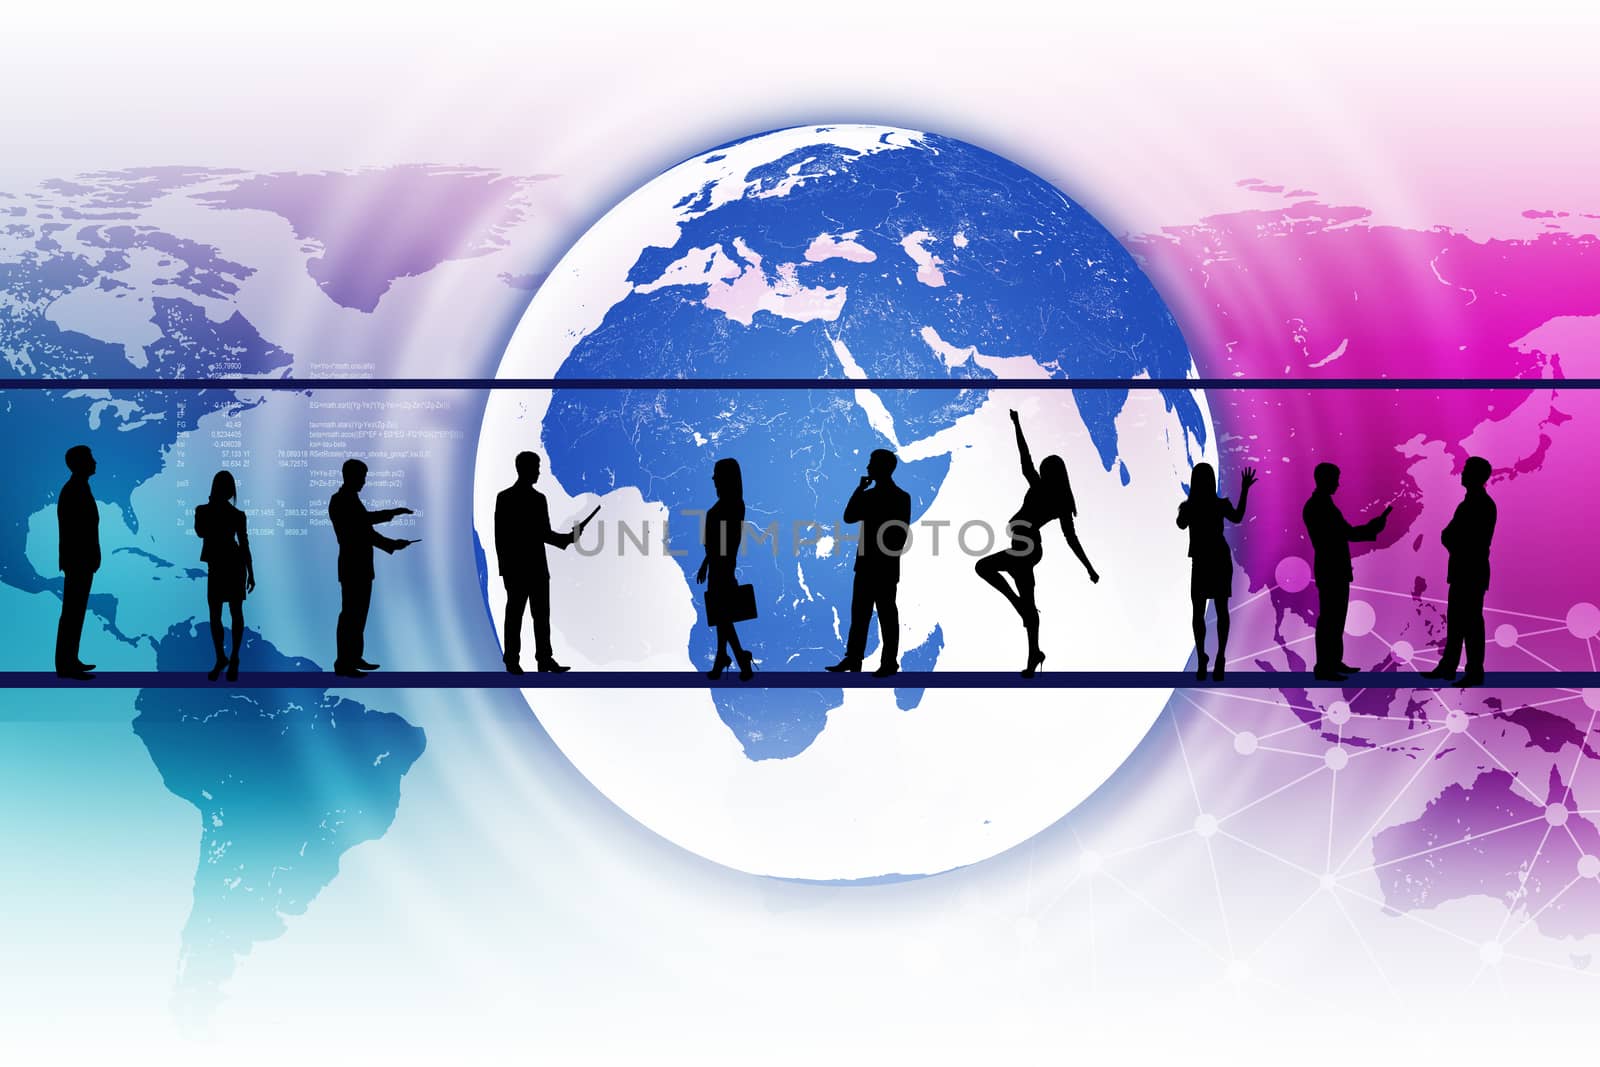 Silhouettes of business people in different postures on abstract colorful background with earth. Elements of this image furnished by NASA